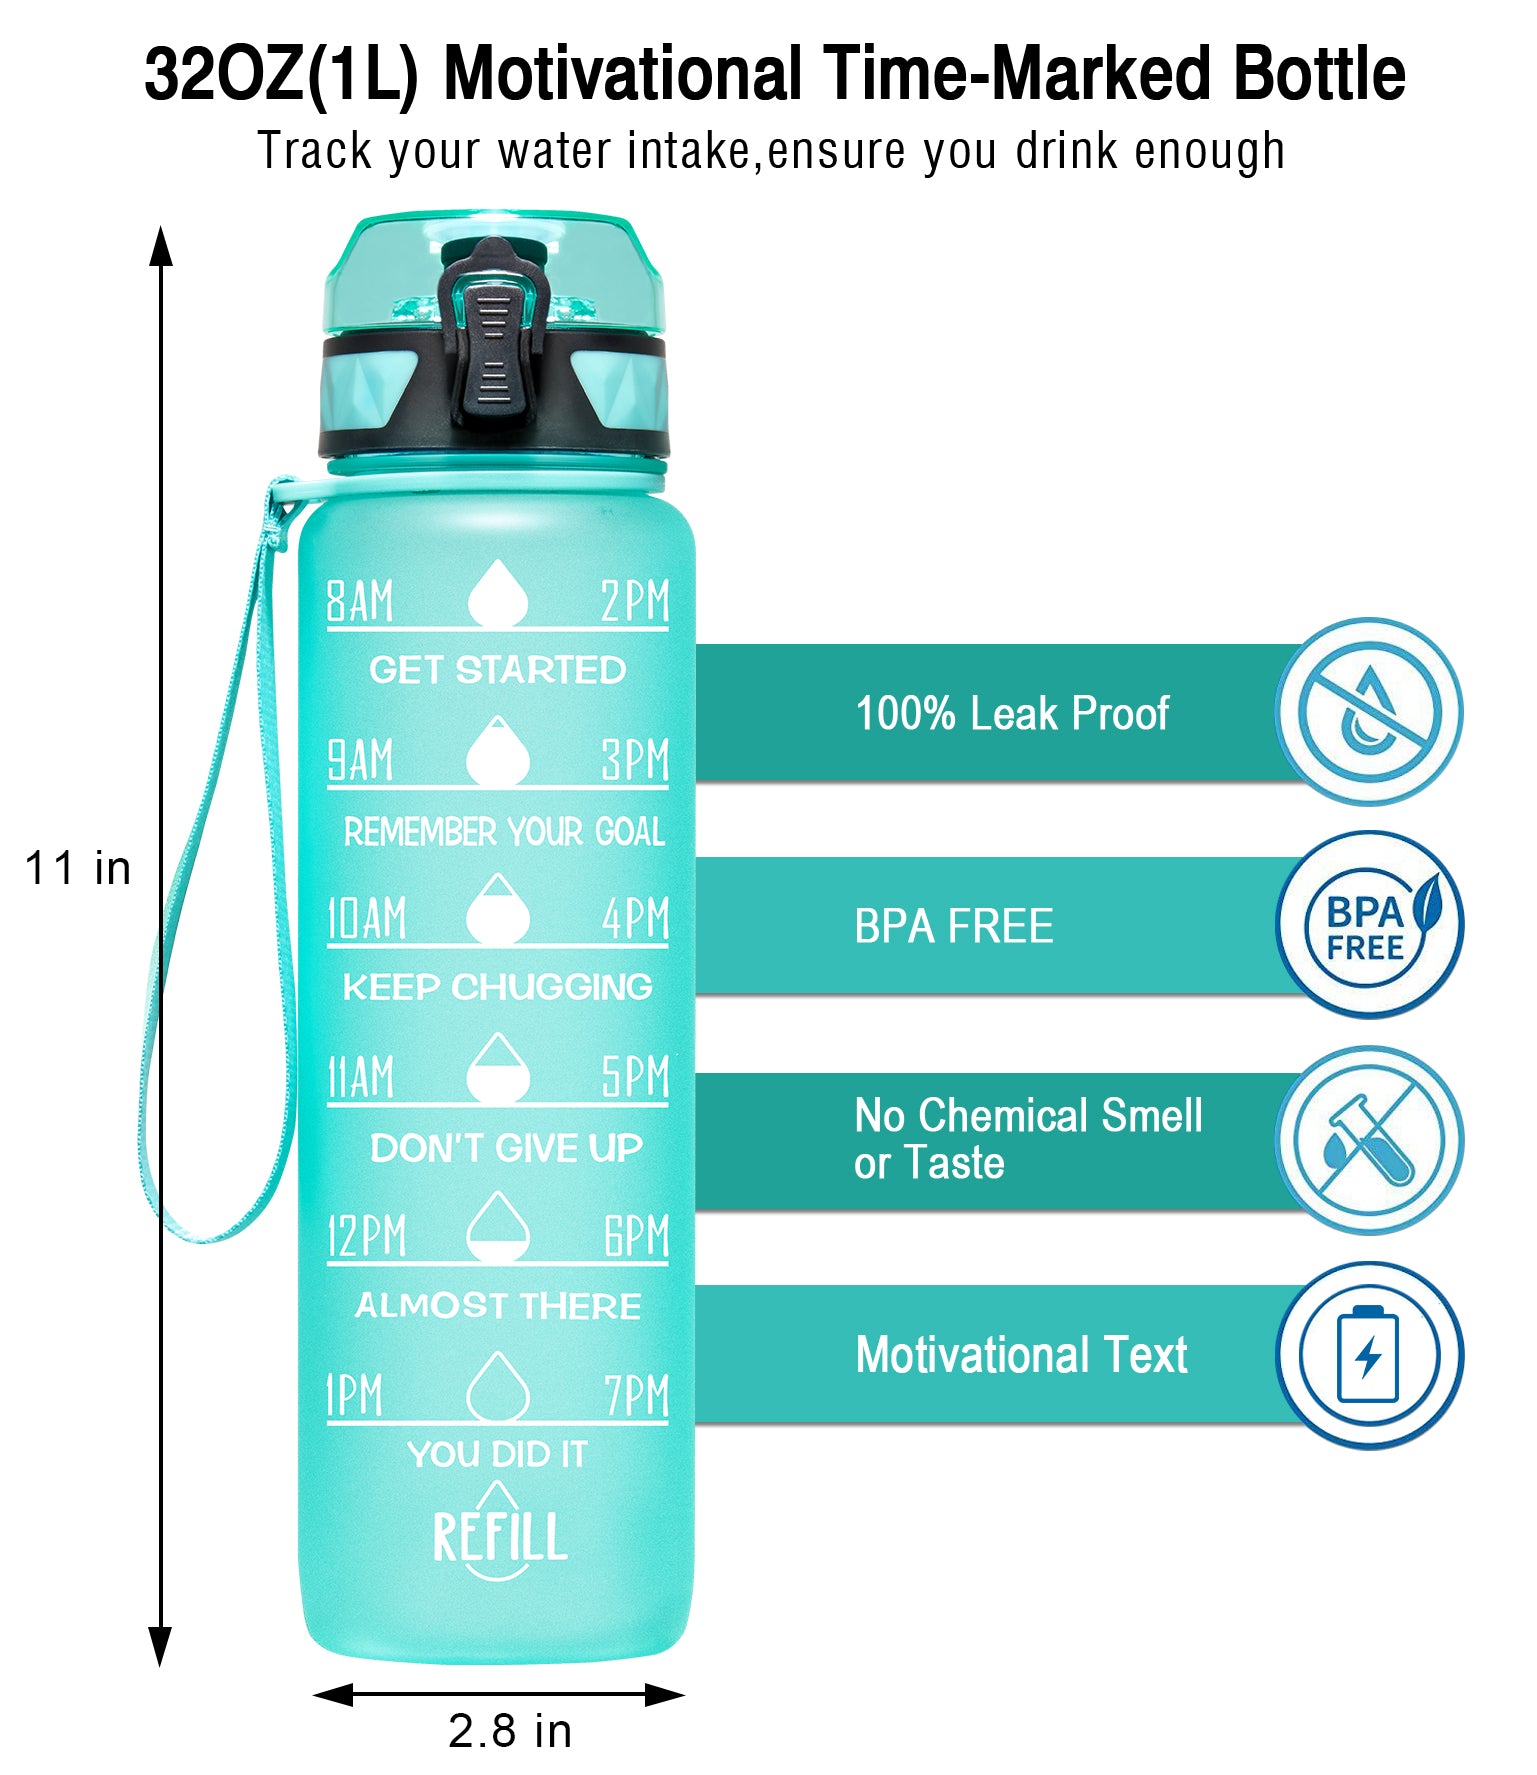 50 Strong BPA Free Reusable Water Bottle with Time Marker - 30 oz.  Motivational Fitness Bottles - Hours Marked - Drink More Water Daily -  Tracker Helps You Drink Water All Day 